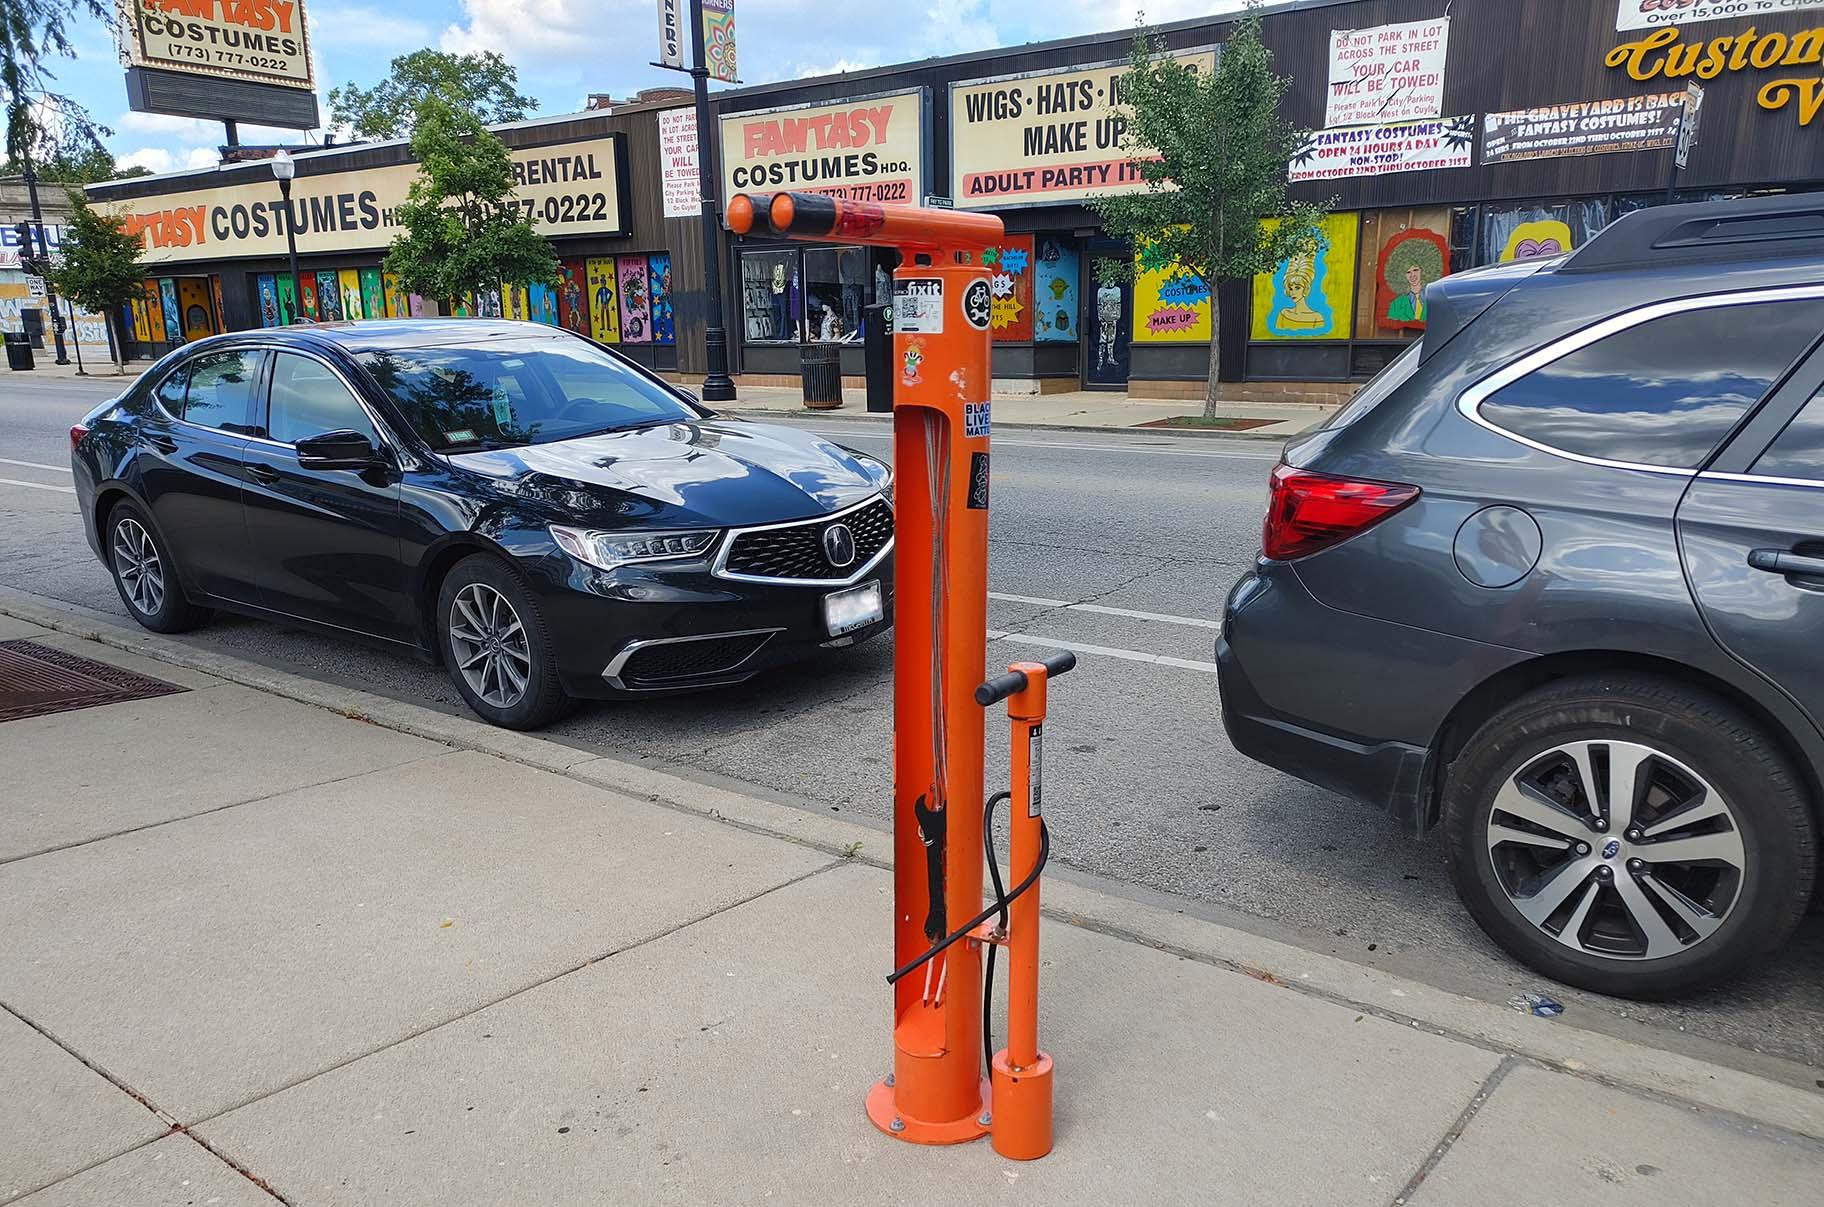 The first Fixit bike repair station to arrive in Portage Park is located at Milwaukee and Cuyler avenues. (Erica Gunderson / WTTW News)